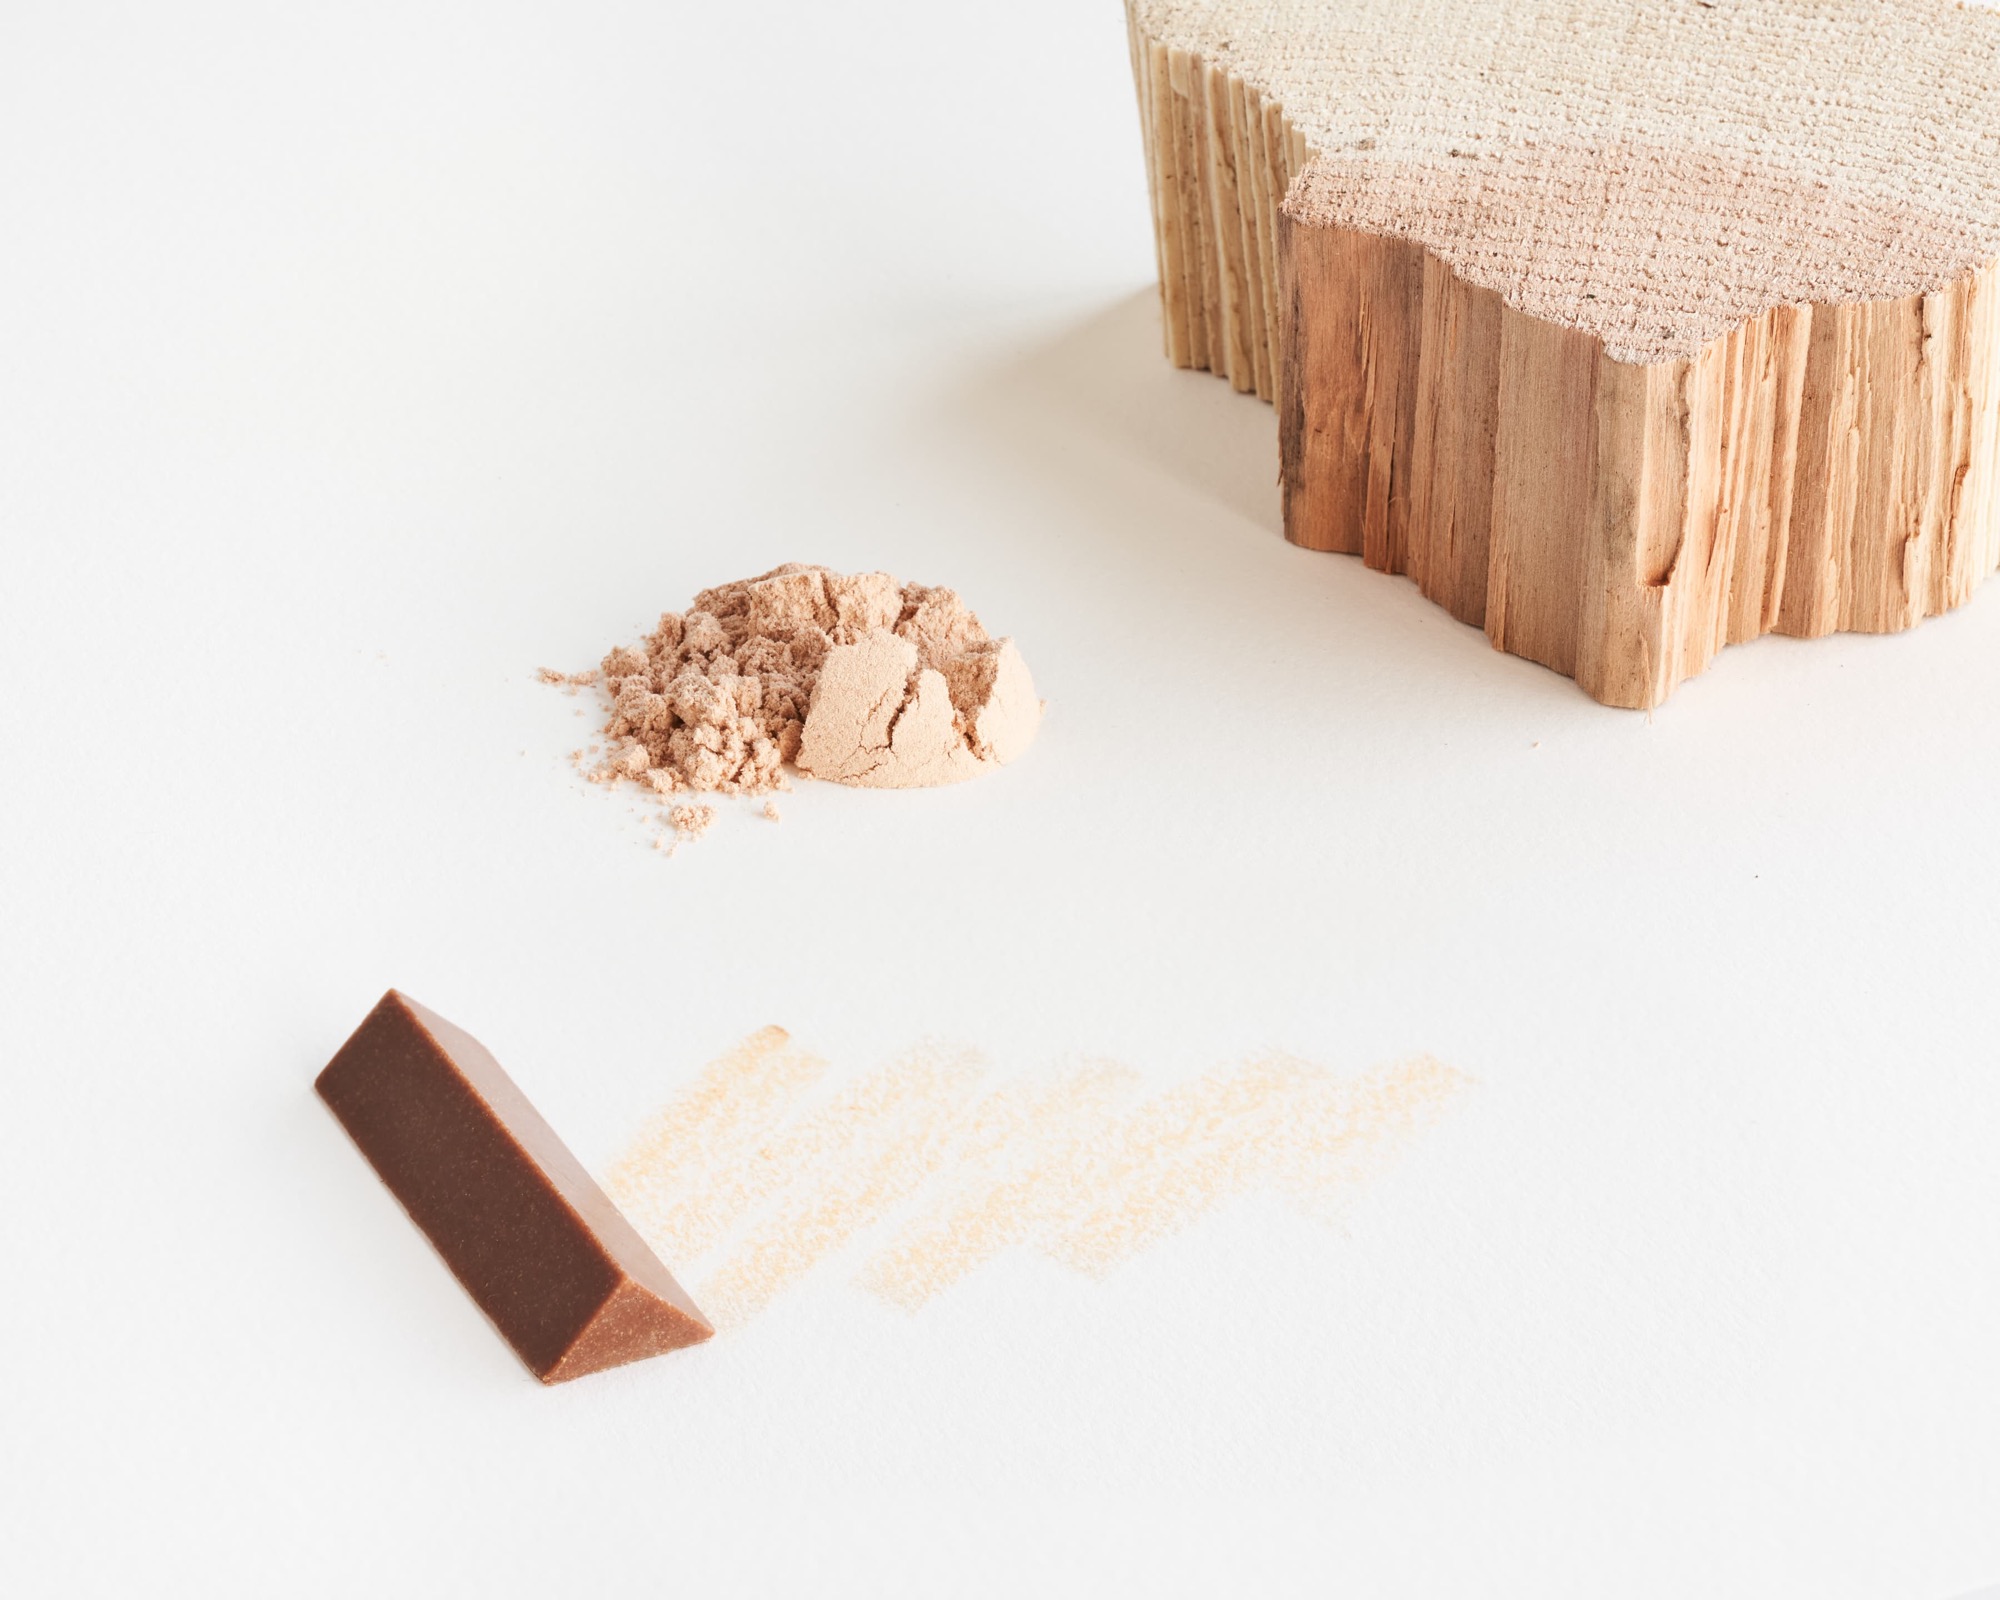 a triangular crayon with a warm rusty hue, shown next to a piece of timber from which its pigment was ground